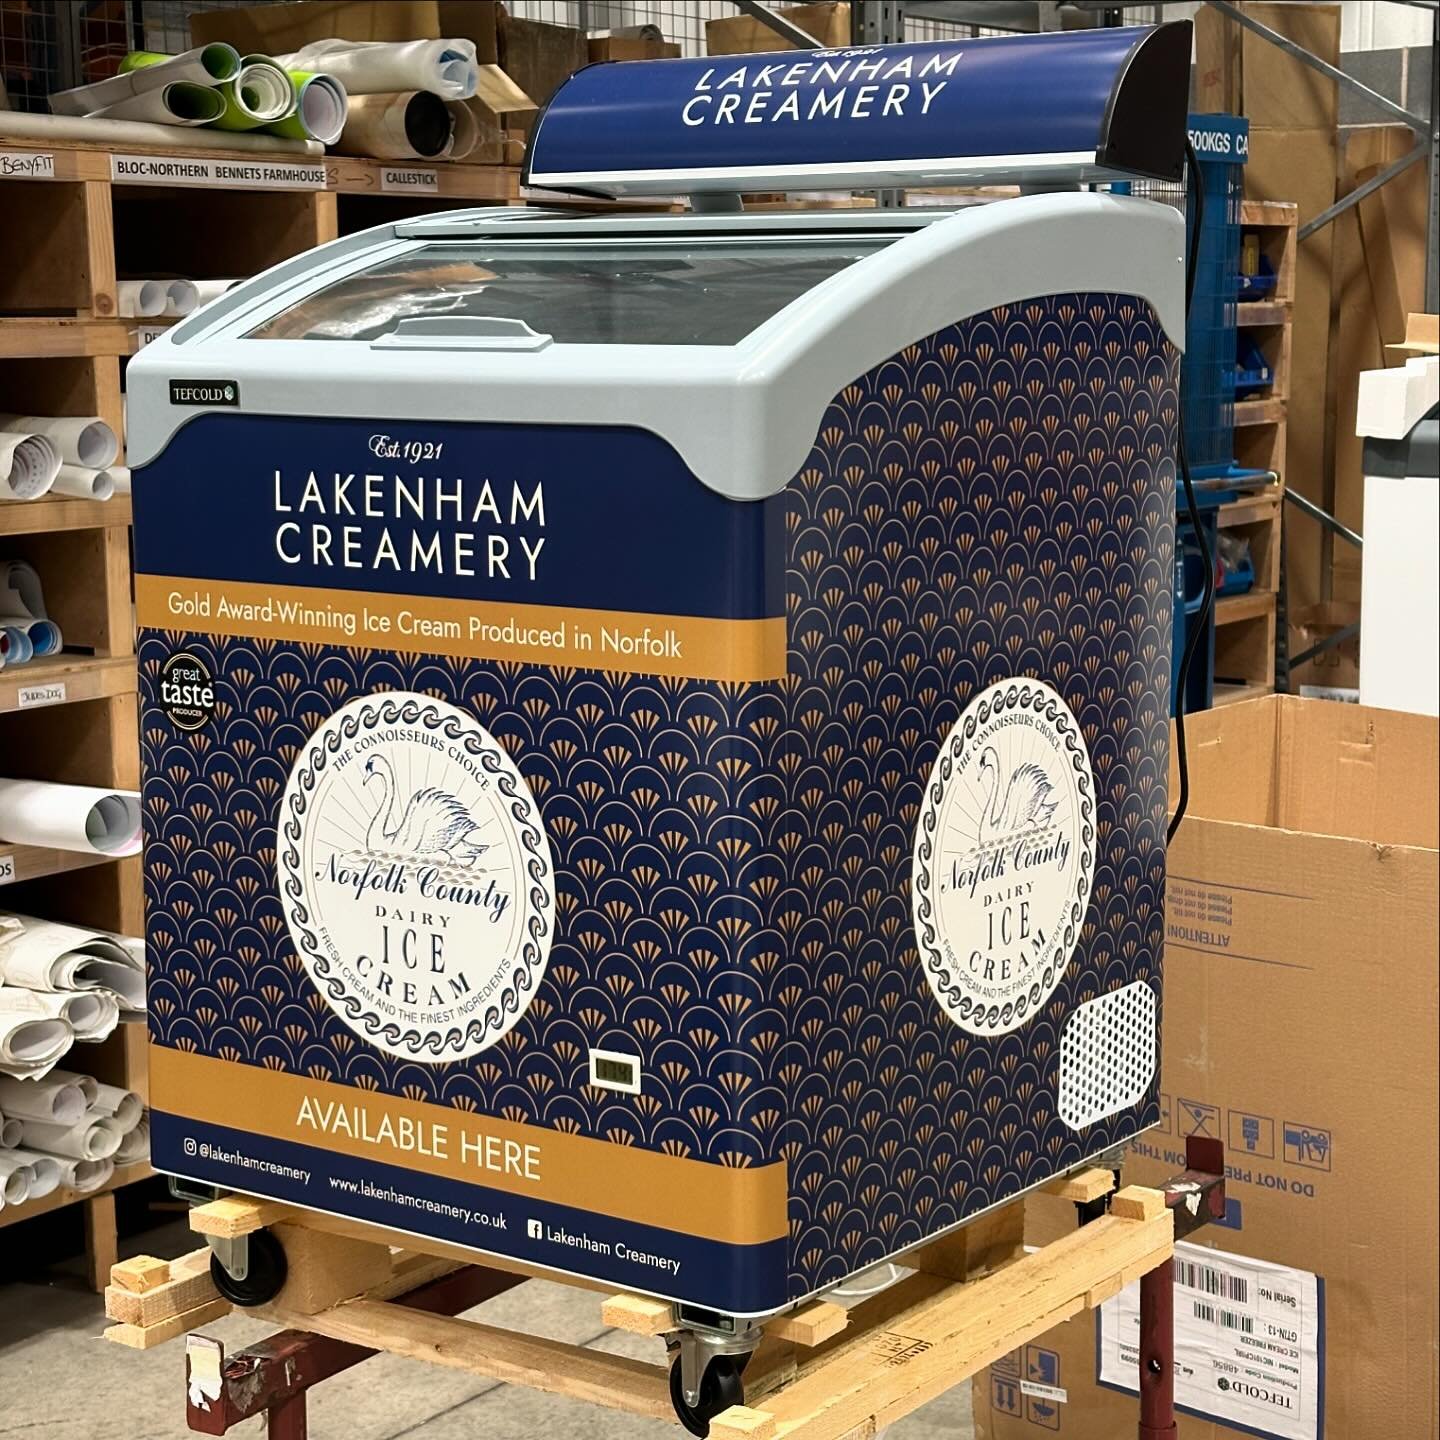 Our new freezers have arrived from @tefcold - wrapped in our unique, Norfolk County print with our swan logo! A real eye catcher 🍦

Designed by: @paul_kirk_design 

#lakenhamcreamery #norfolkcountyicecream #supportlocal #icecreamshop #icecream #norf